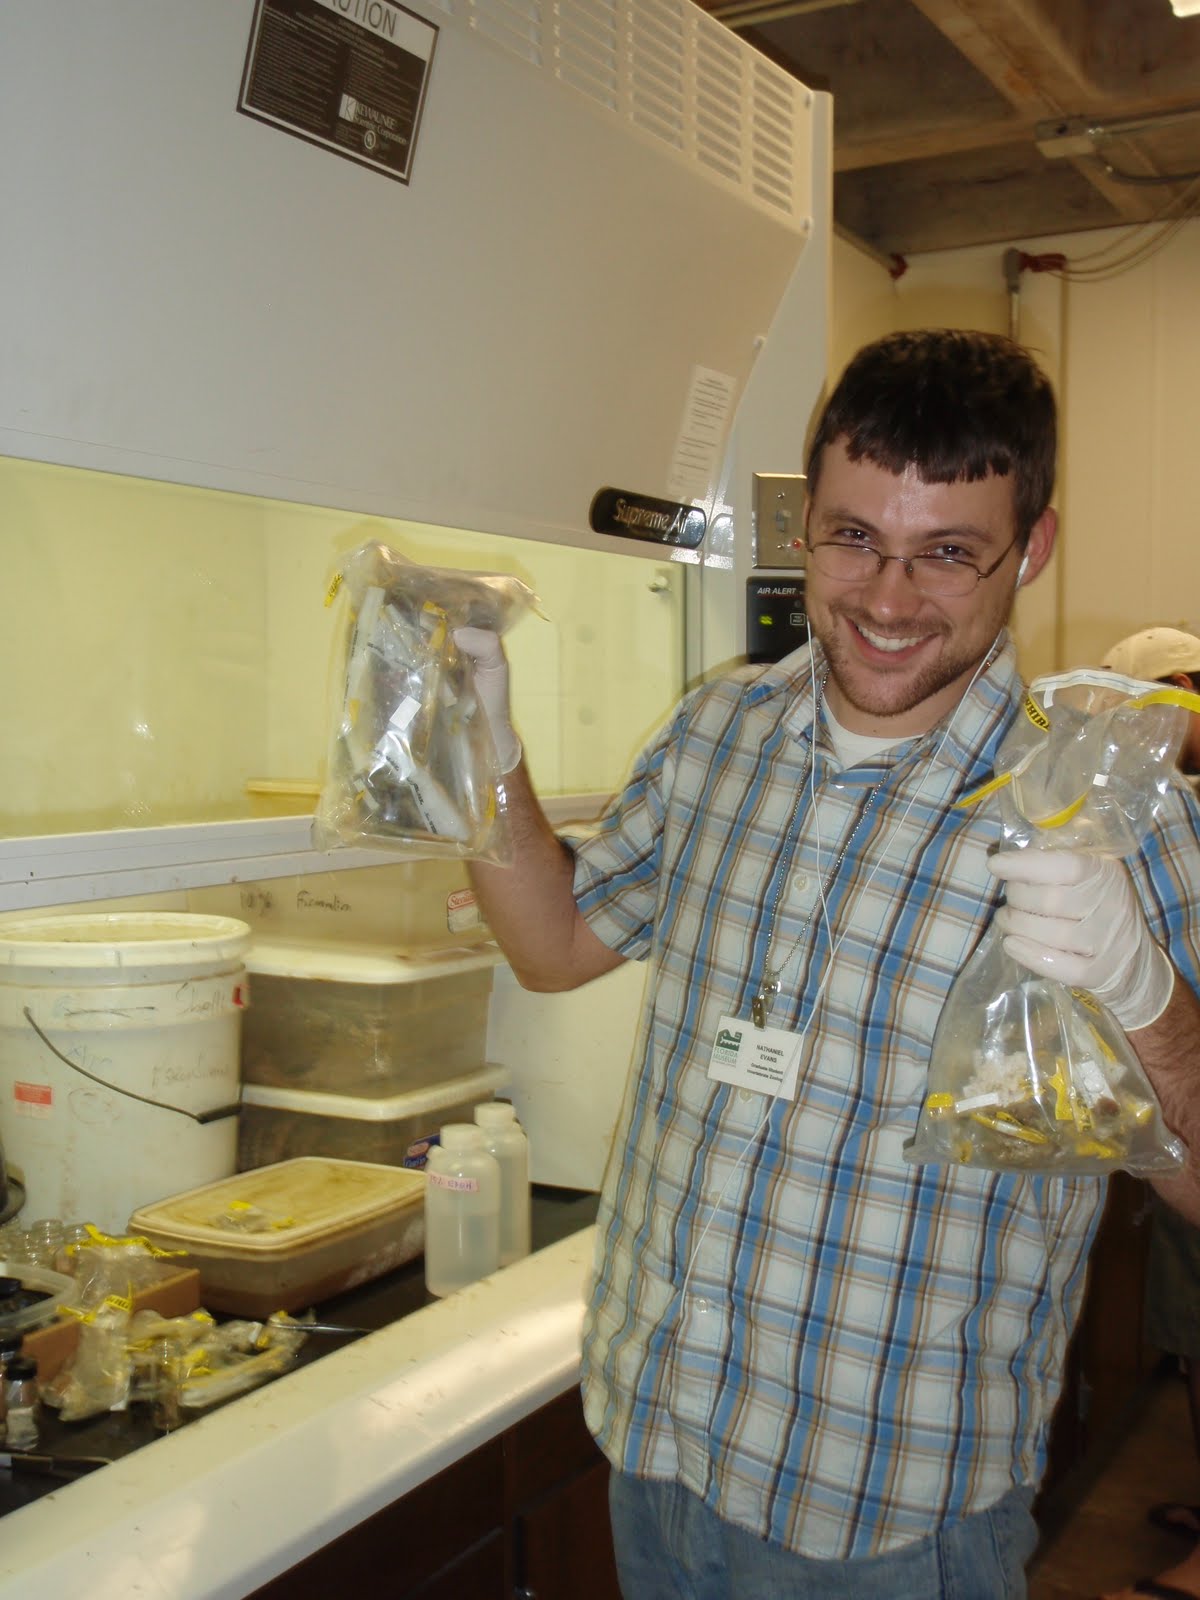 Nat posing with bags of specimens at the fume hood